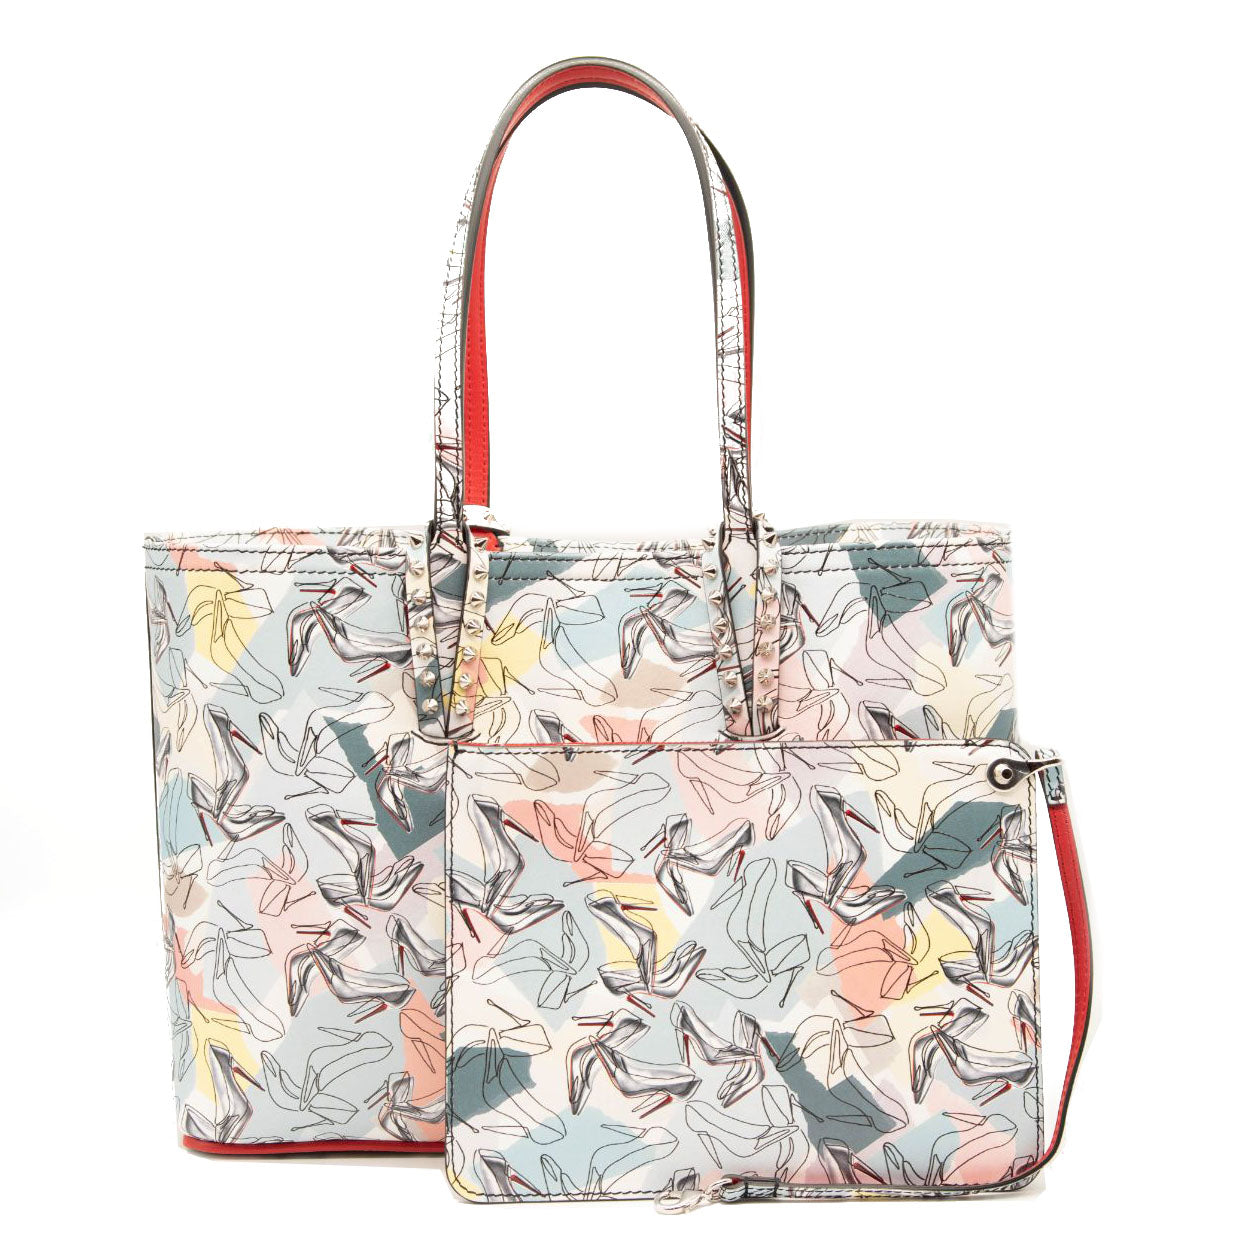 Cabata Small Leather Tote in Beige - Christian Louboutin